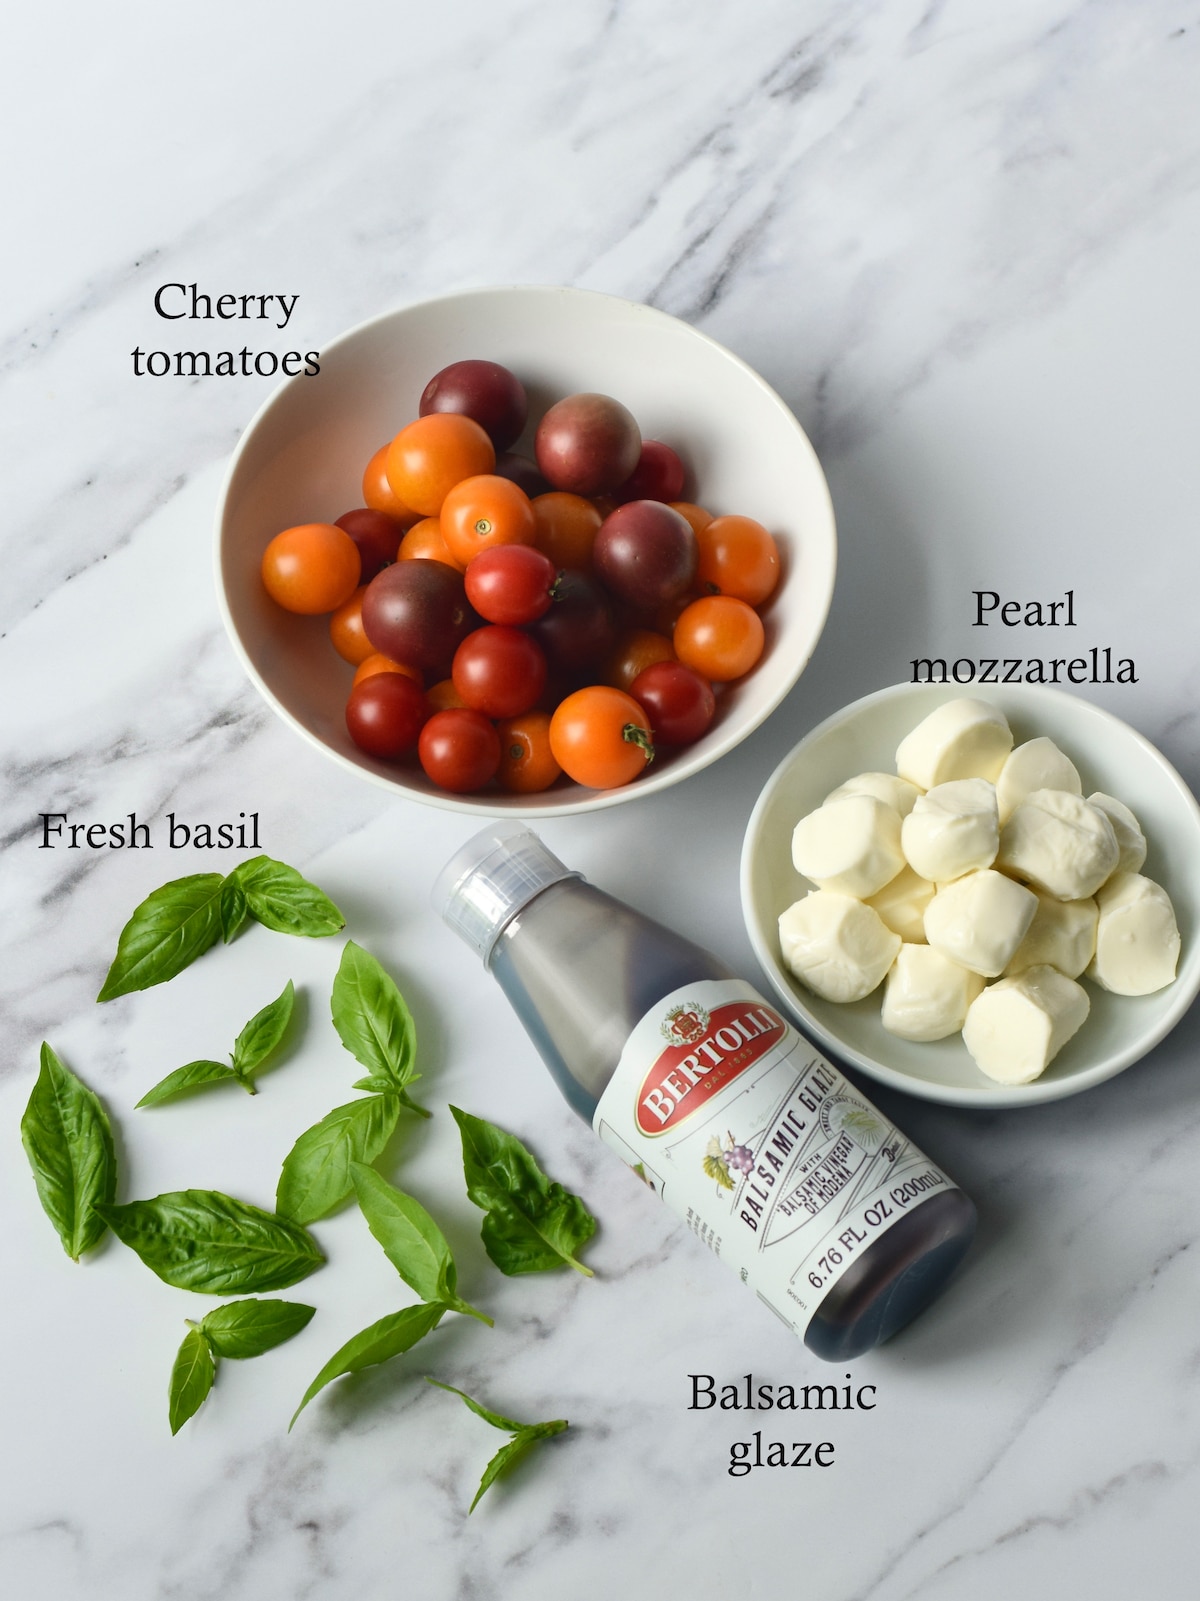 Ingredients for cherry tomato mozzarella balls basil skewers appetizers.
